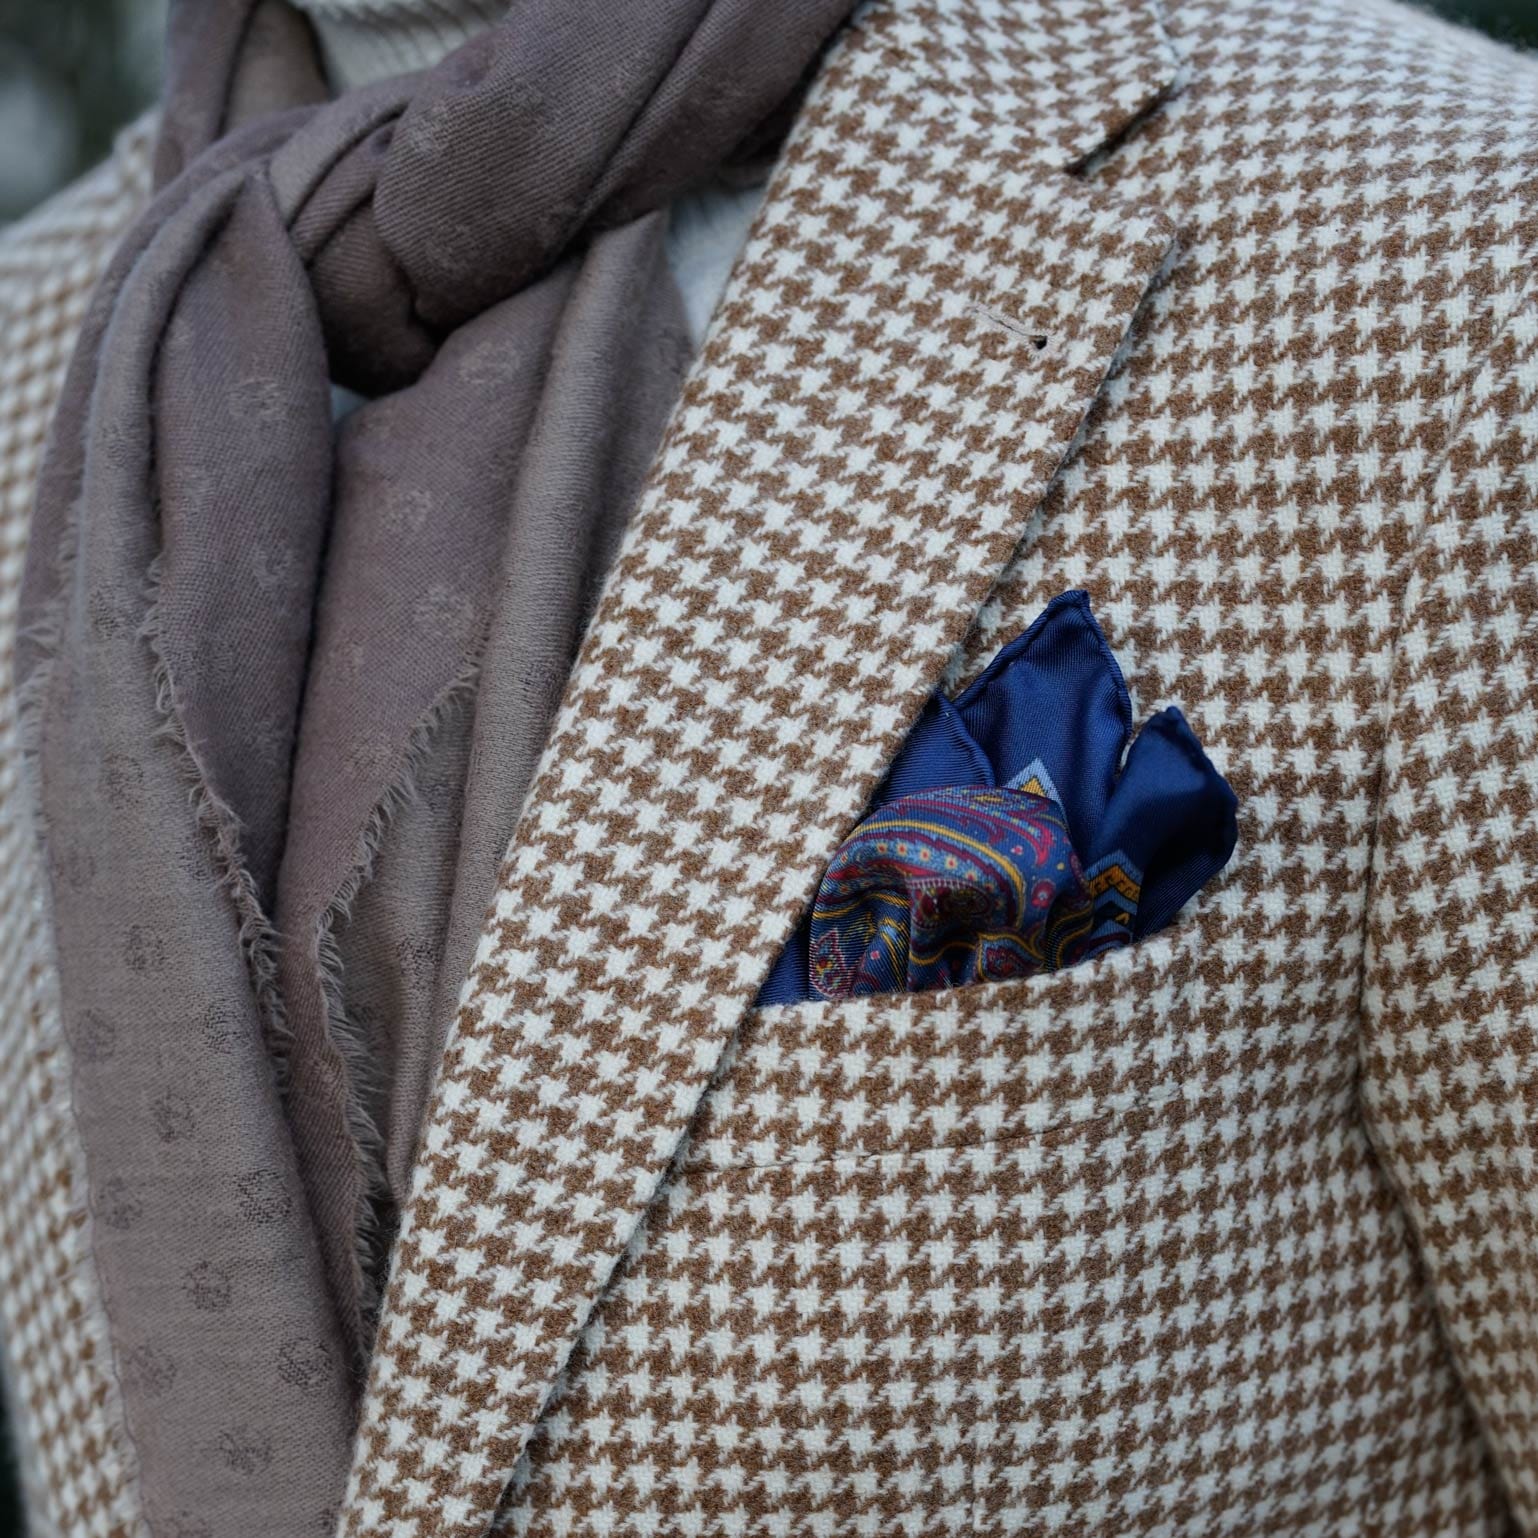 Royal Blue Jacket with a pocket square